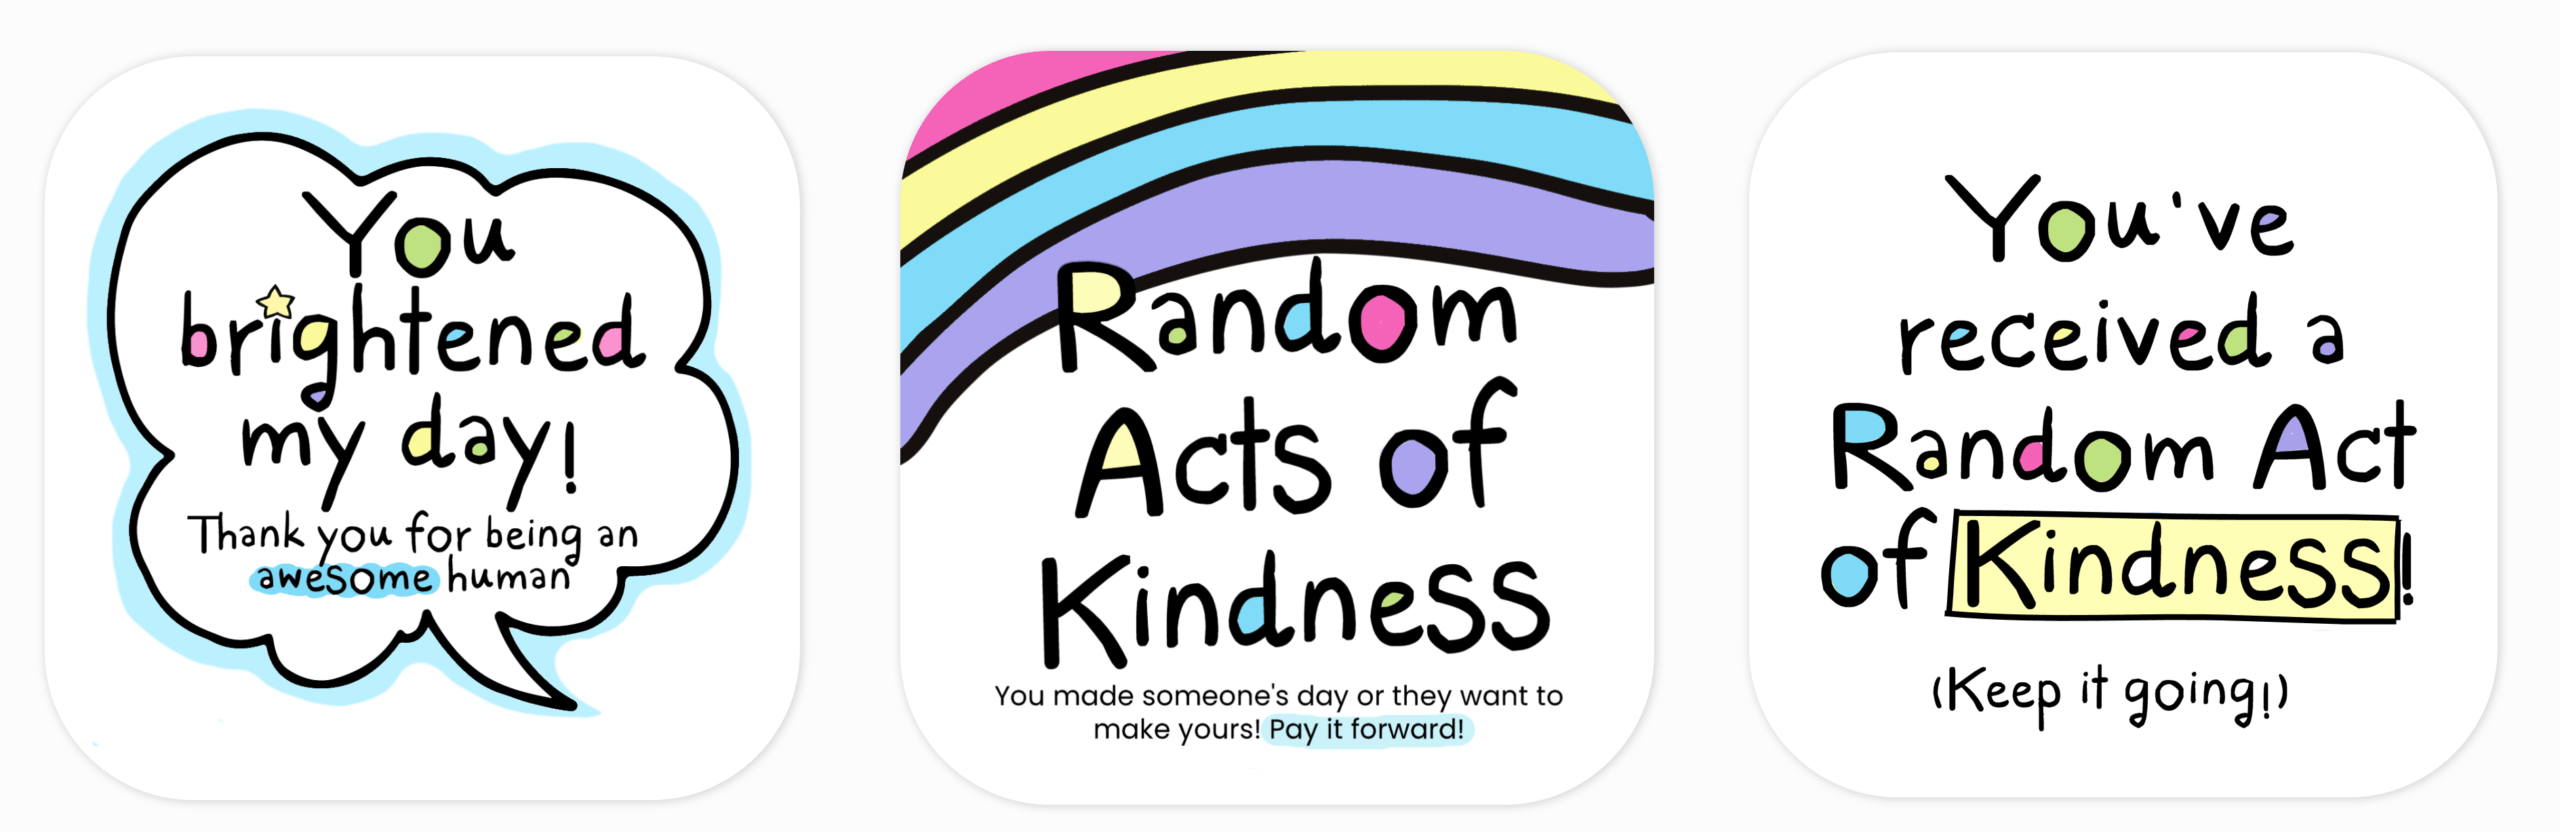 Random Acts Of Kindness Cards – Blessing Manifesting Intended For Random Acts Of Kindness Cards Templates